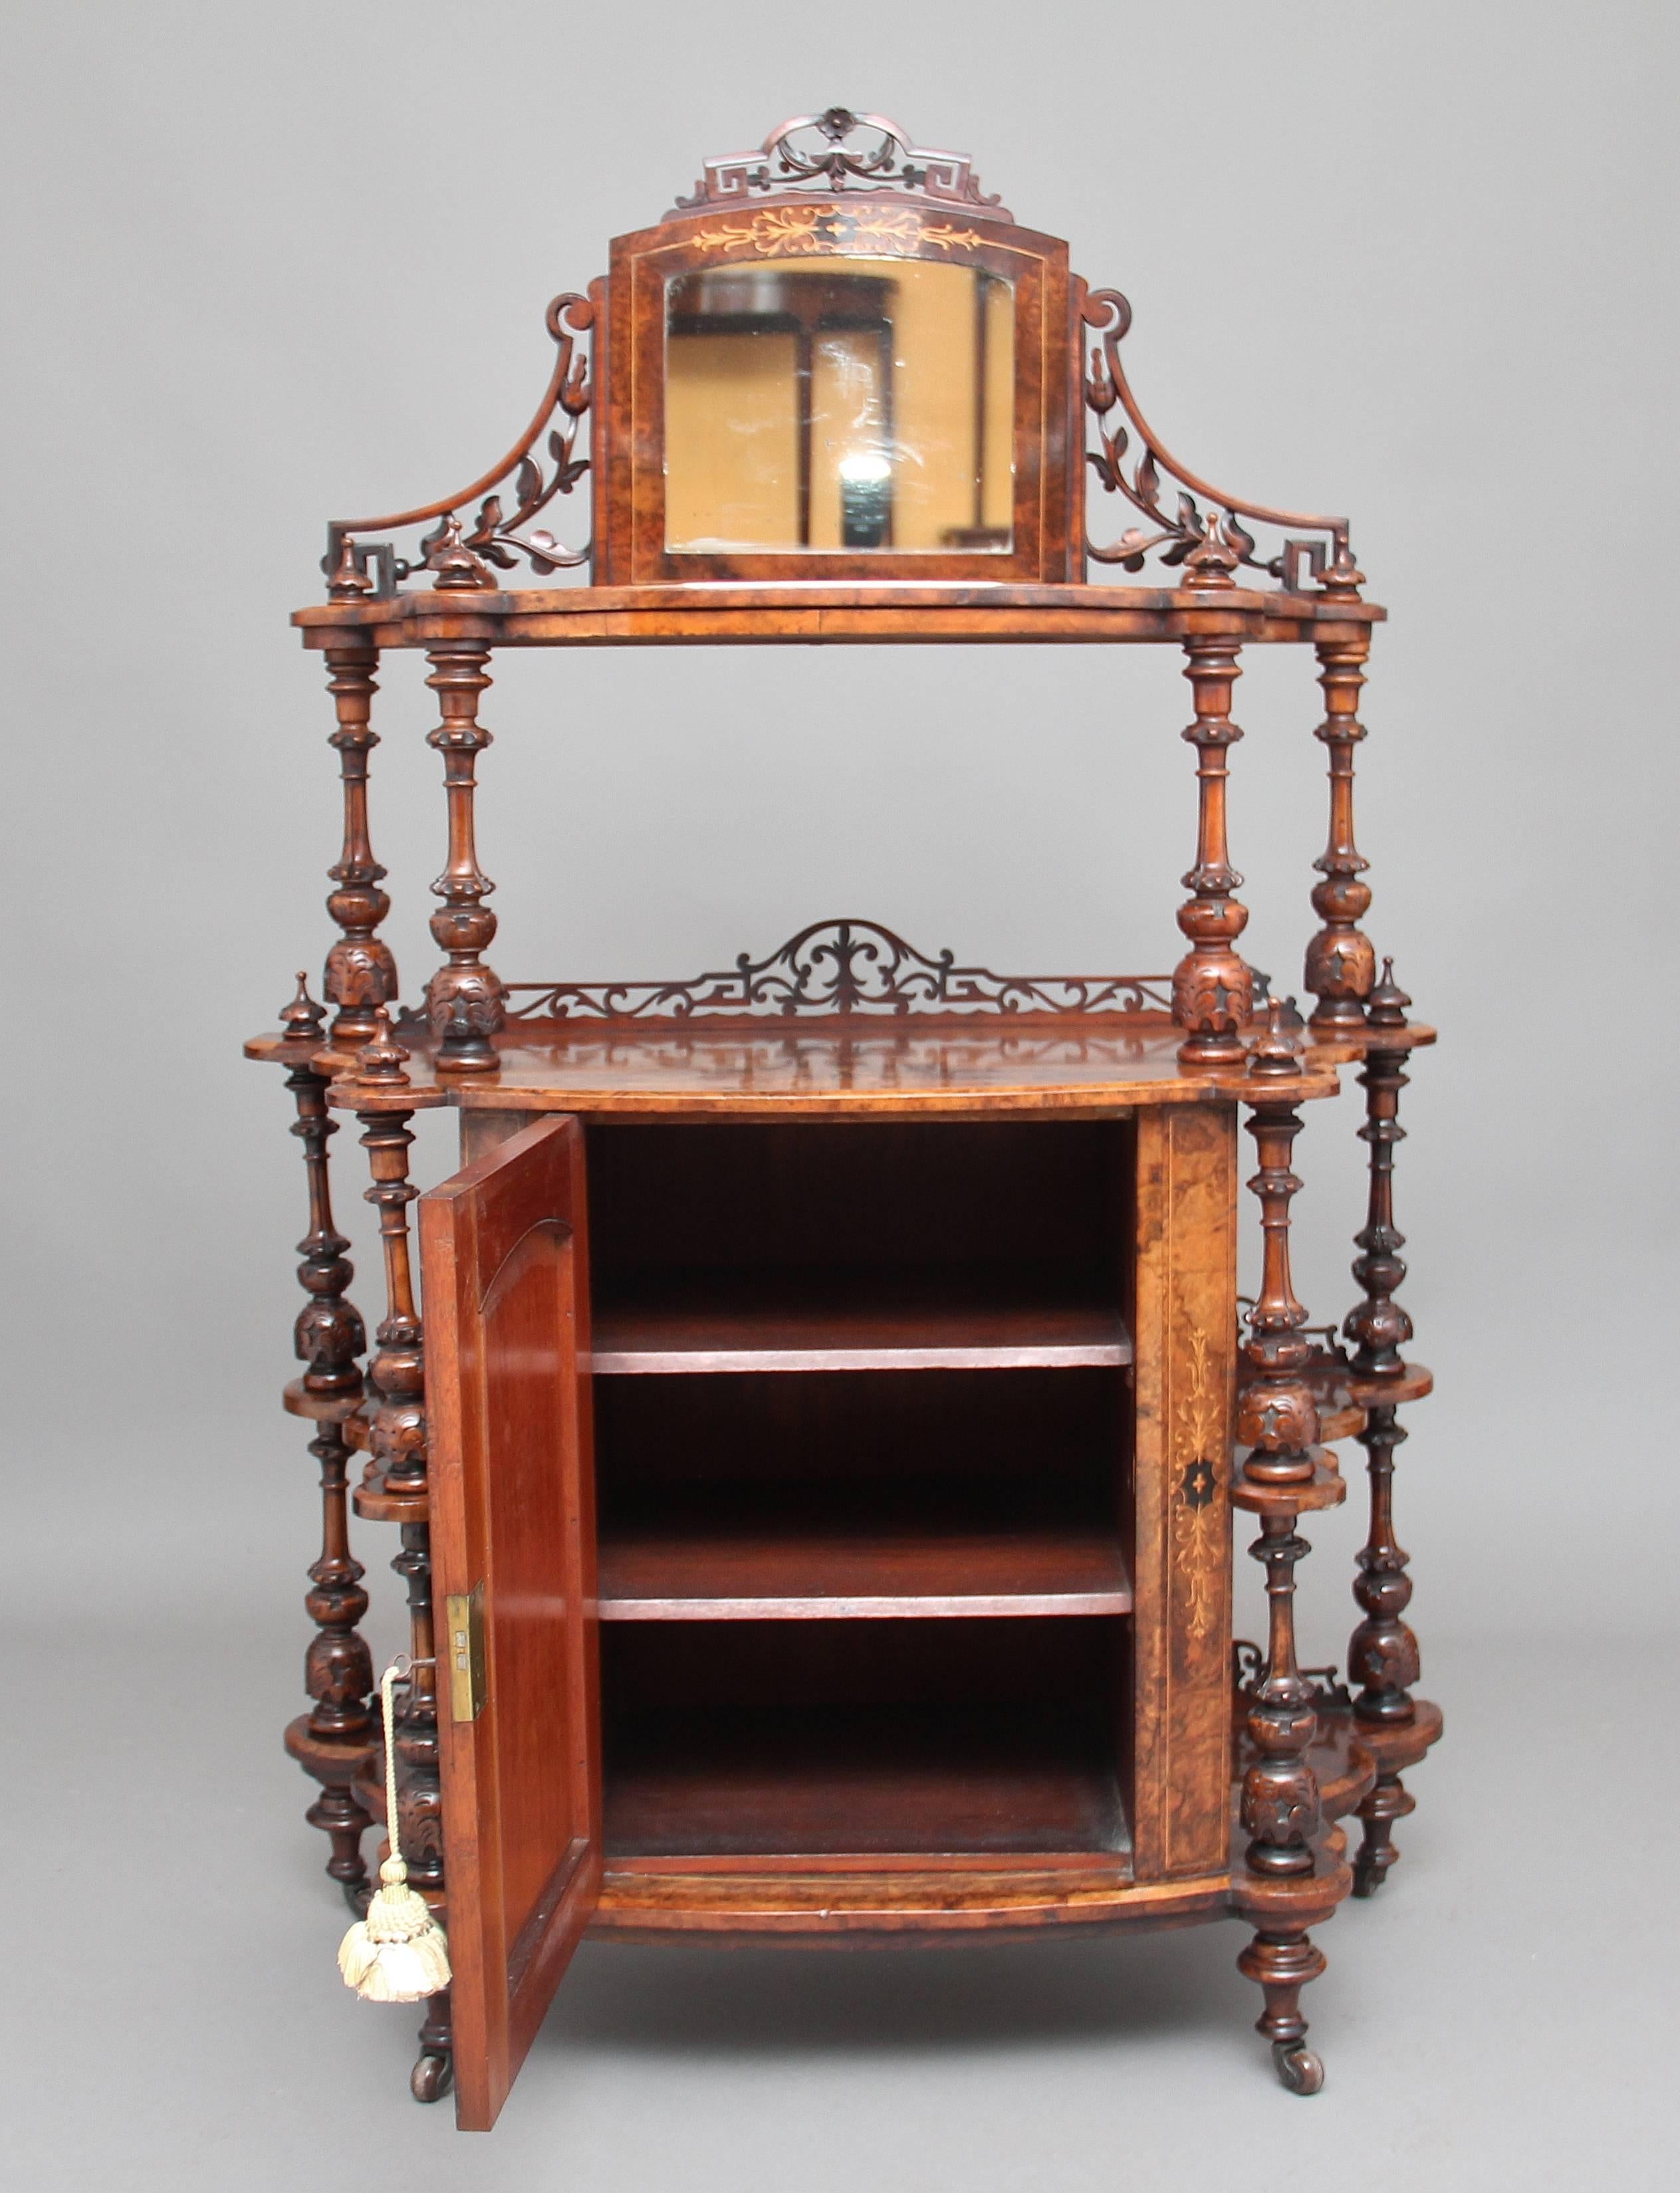 19th century burr walnut and inlaid whatnot cabinet of bowfronted form, having a fret carved mirrored superstructure above a shelf supported by carved and turned columns finishing with carved finials, a single door below opening to reveal two fixed